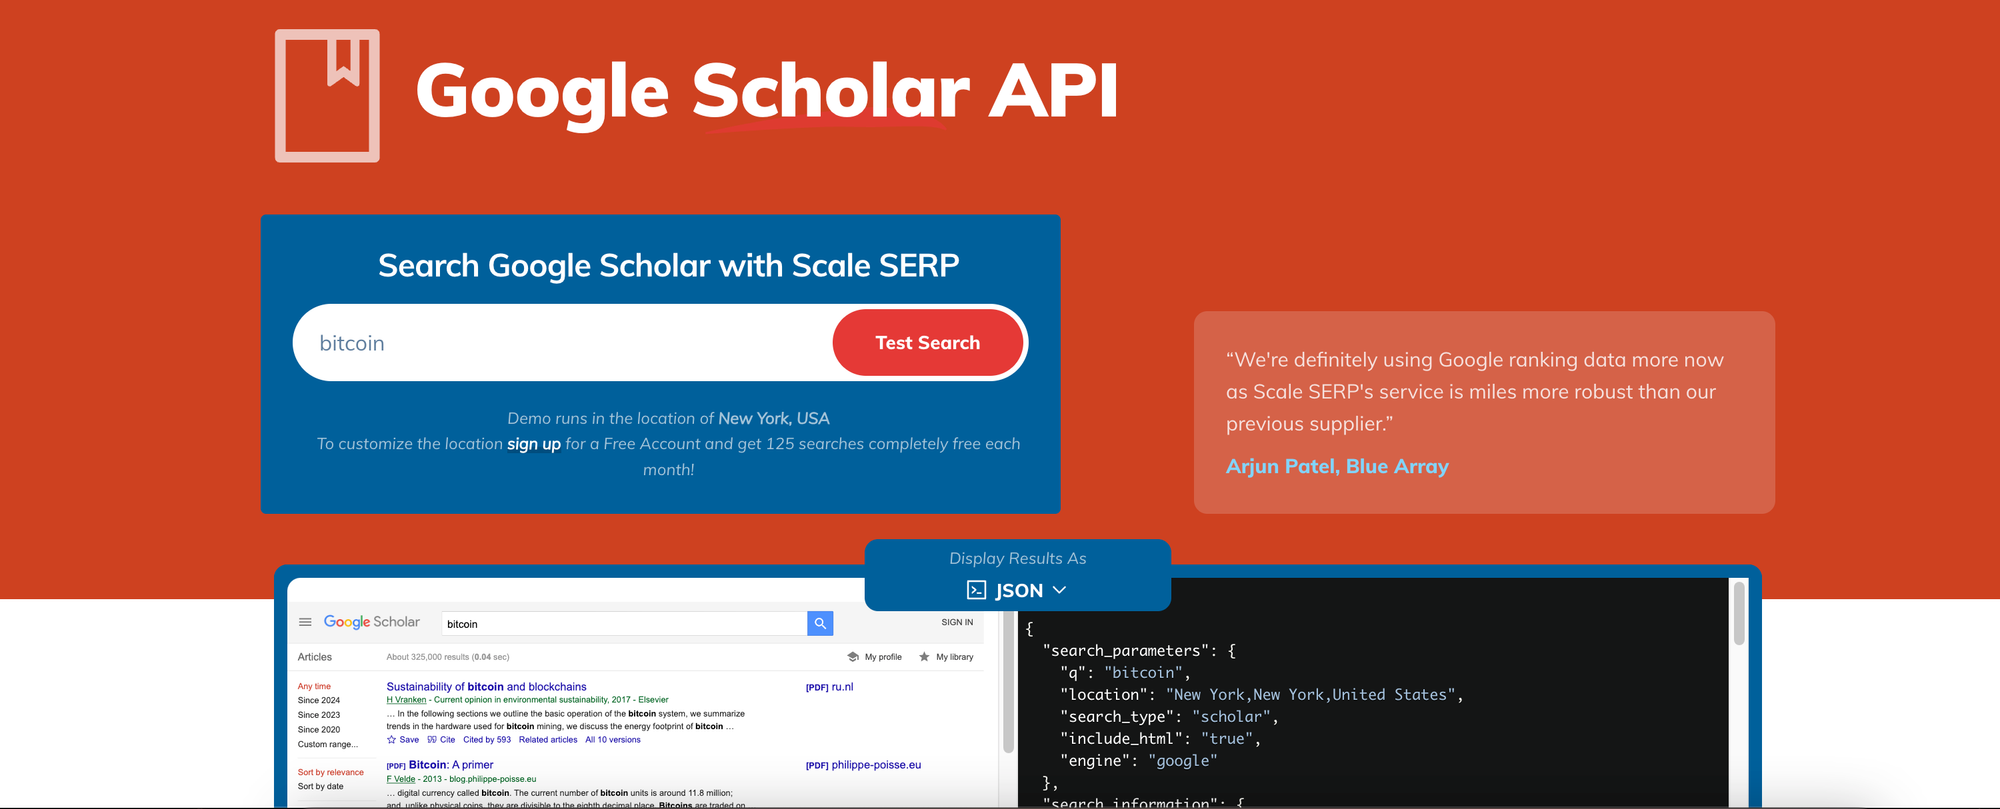 The languages solution. ScaleSERP scraping Google Scholar in Node.js with Axios. Python, PHP, simple curl, and HTTP requests. Doesn't indicate pricing though.